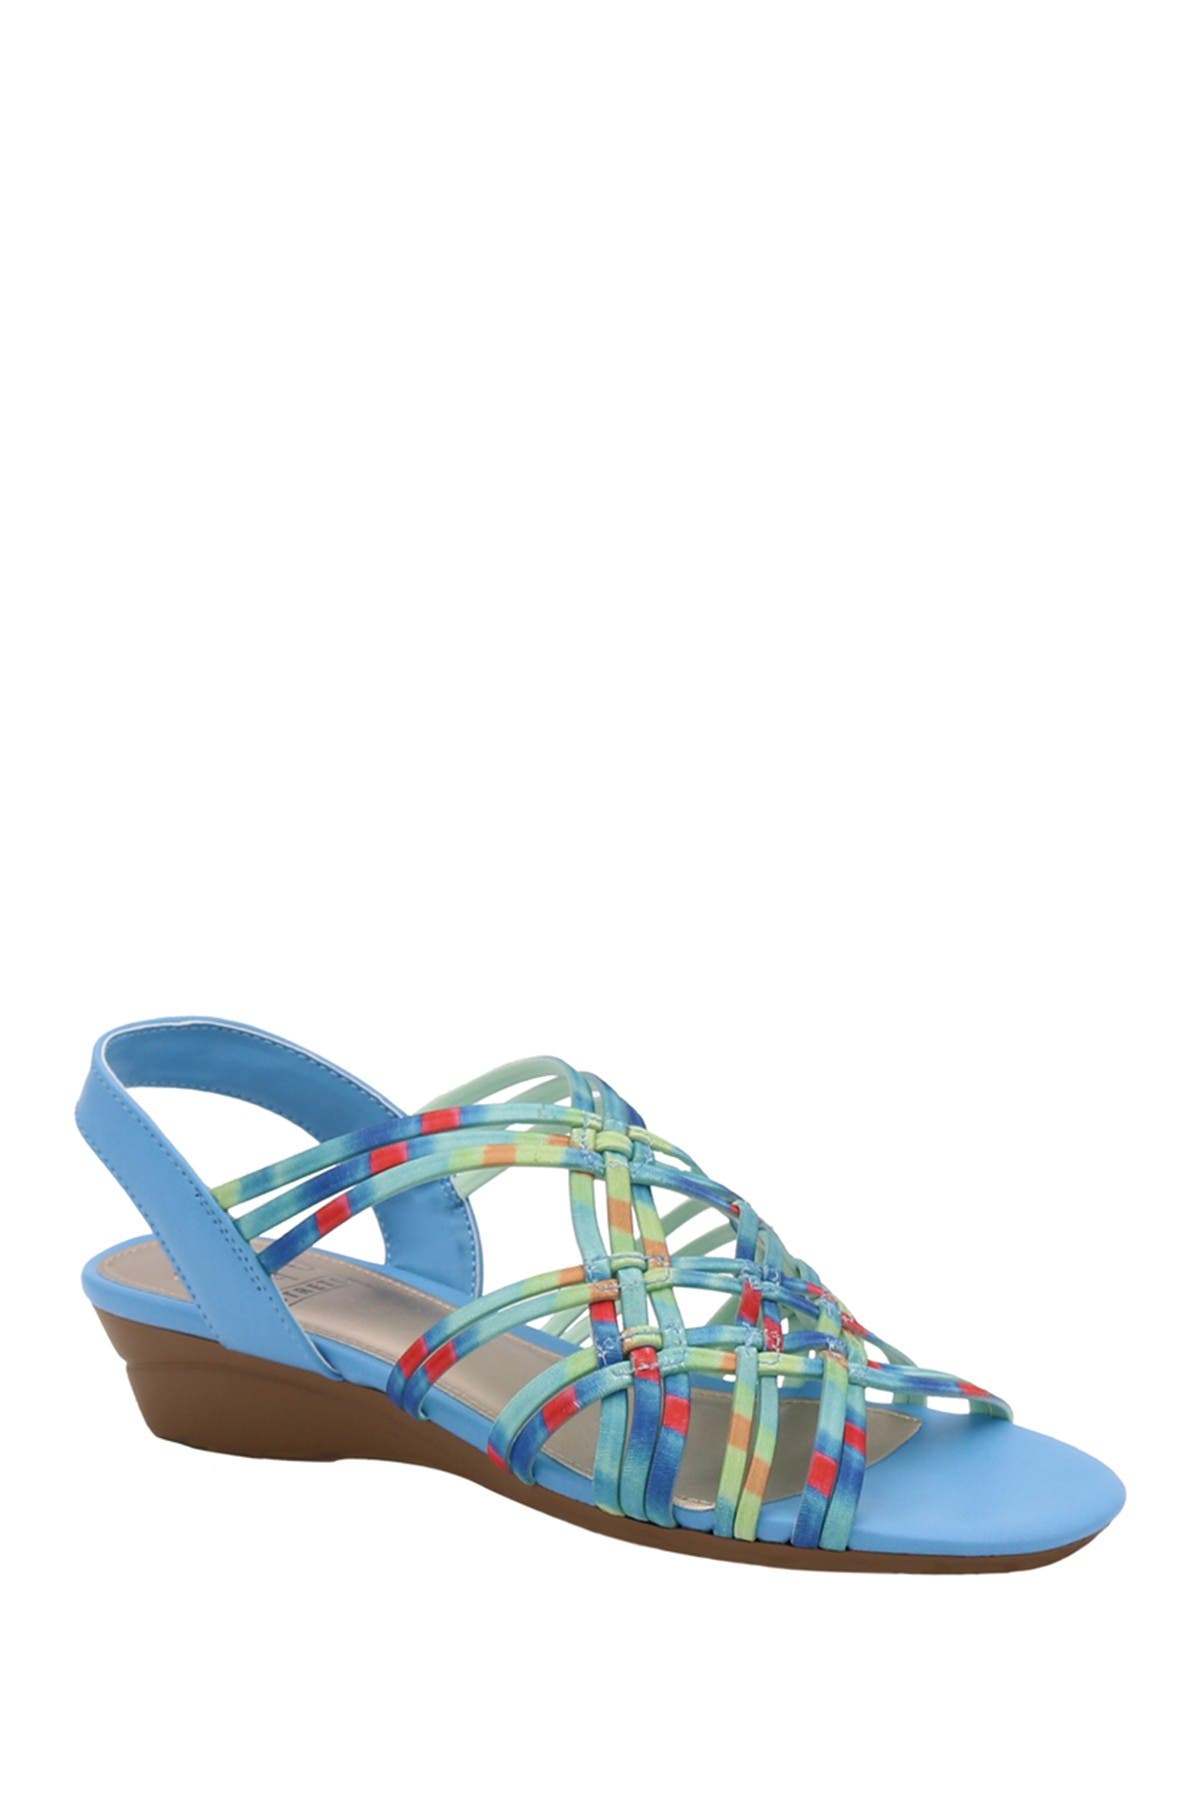 Impo Rainelle Stretch Wedge Sandal In Blue Multi